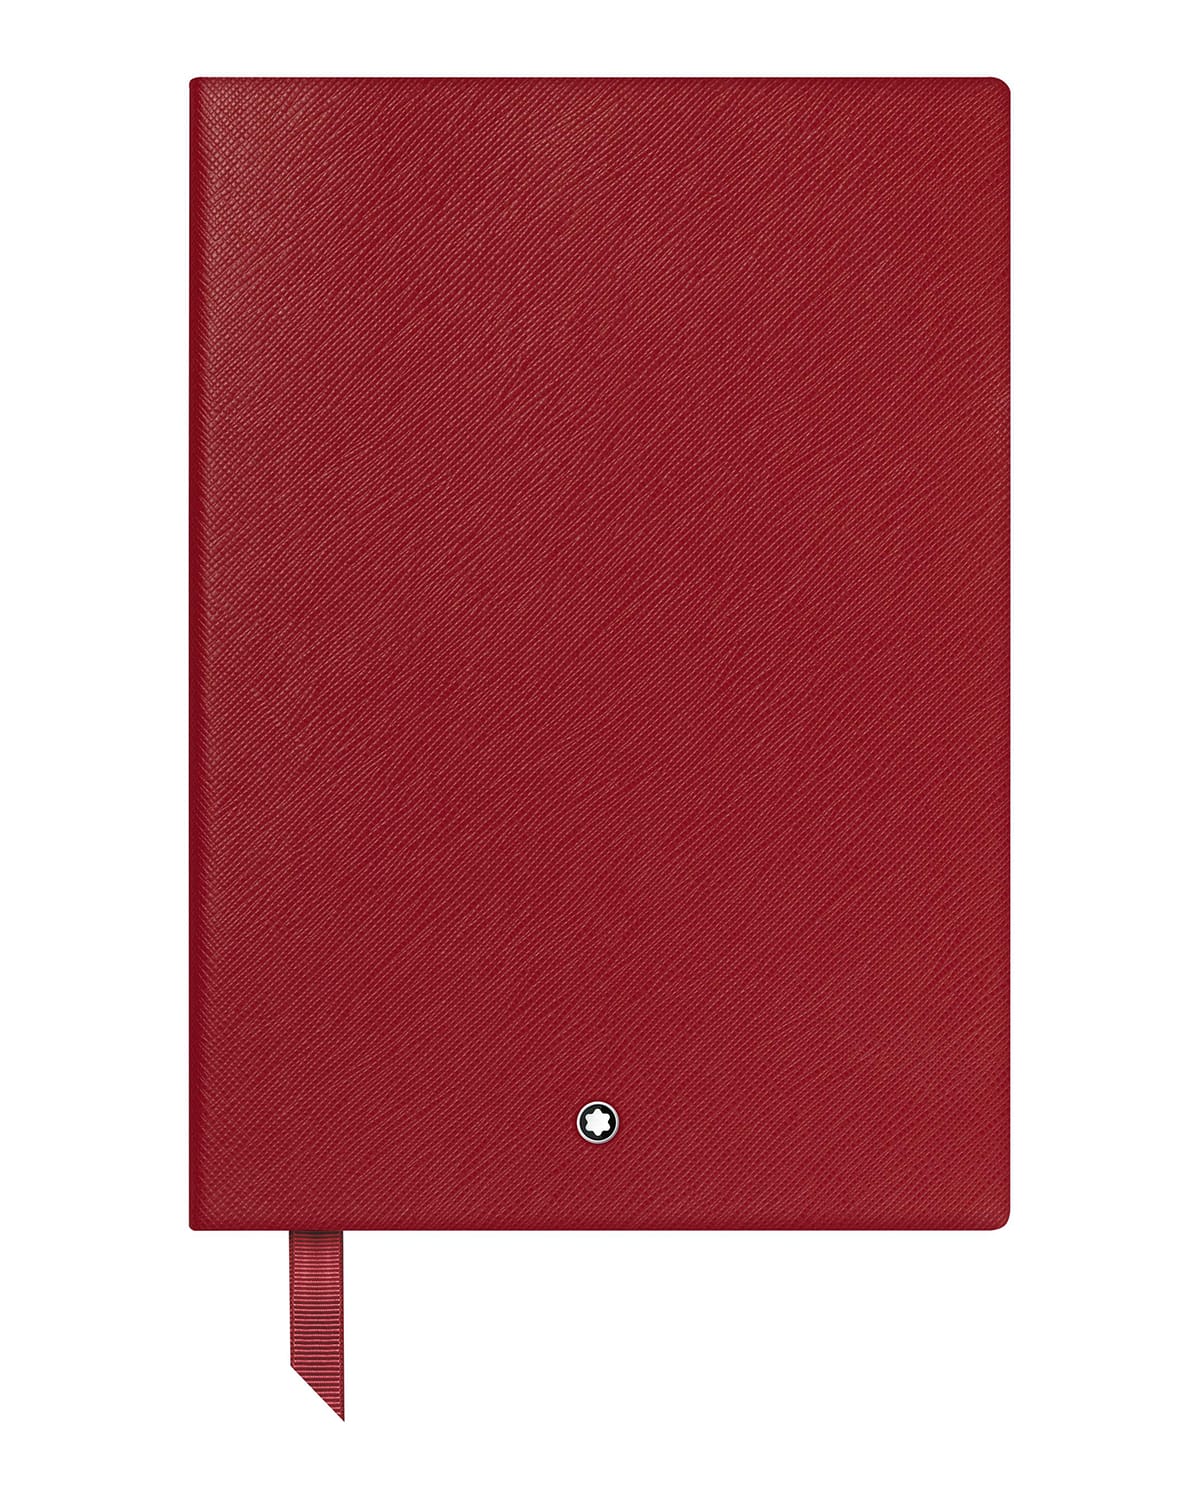 Shop Montblanc Fine Stationary Leather Notebook #146, Red